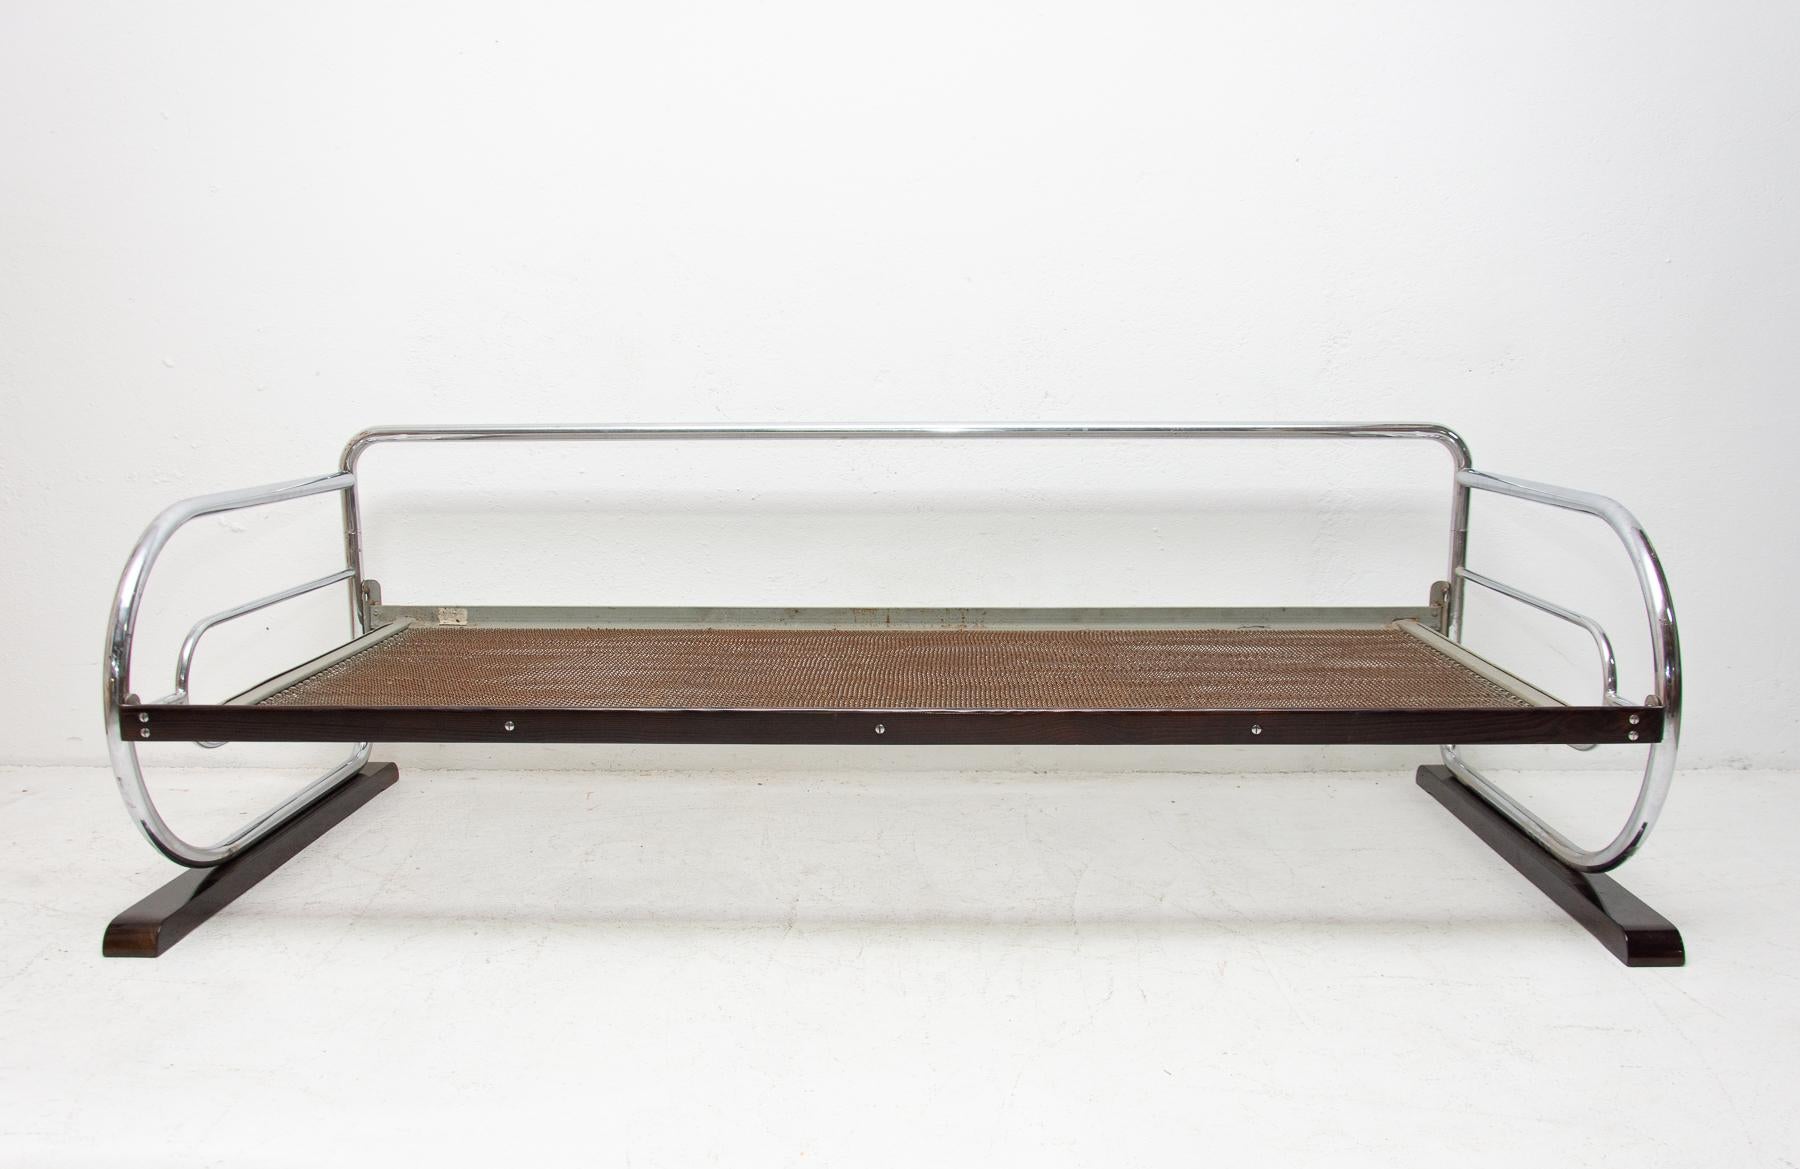 Chromed, tubular steel sofa from the Bauhaus period, 1930s, Bohemia. Made by Robert Slezák company. Chrome is in good vintage condition, bears signs of aging and use, but overall in very good condition. It has two wooden legs in the shape of a ski.